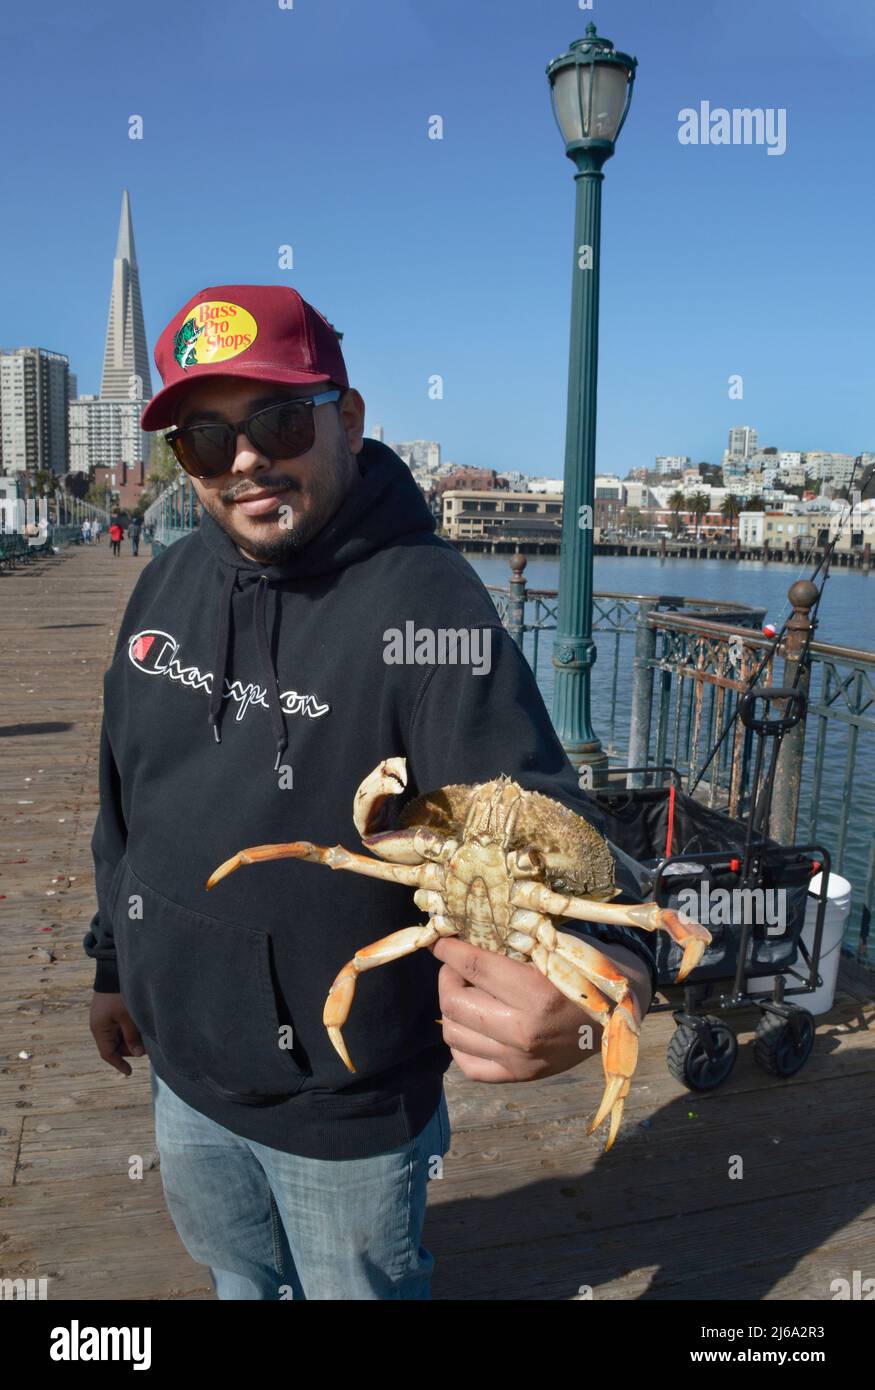 A man holds a crab he caught while recreational crabbing off Pier 7, a  popular fishing pier in San Francisco, California Stock Photo - Alamy